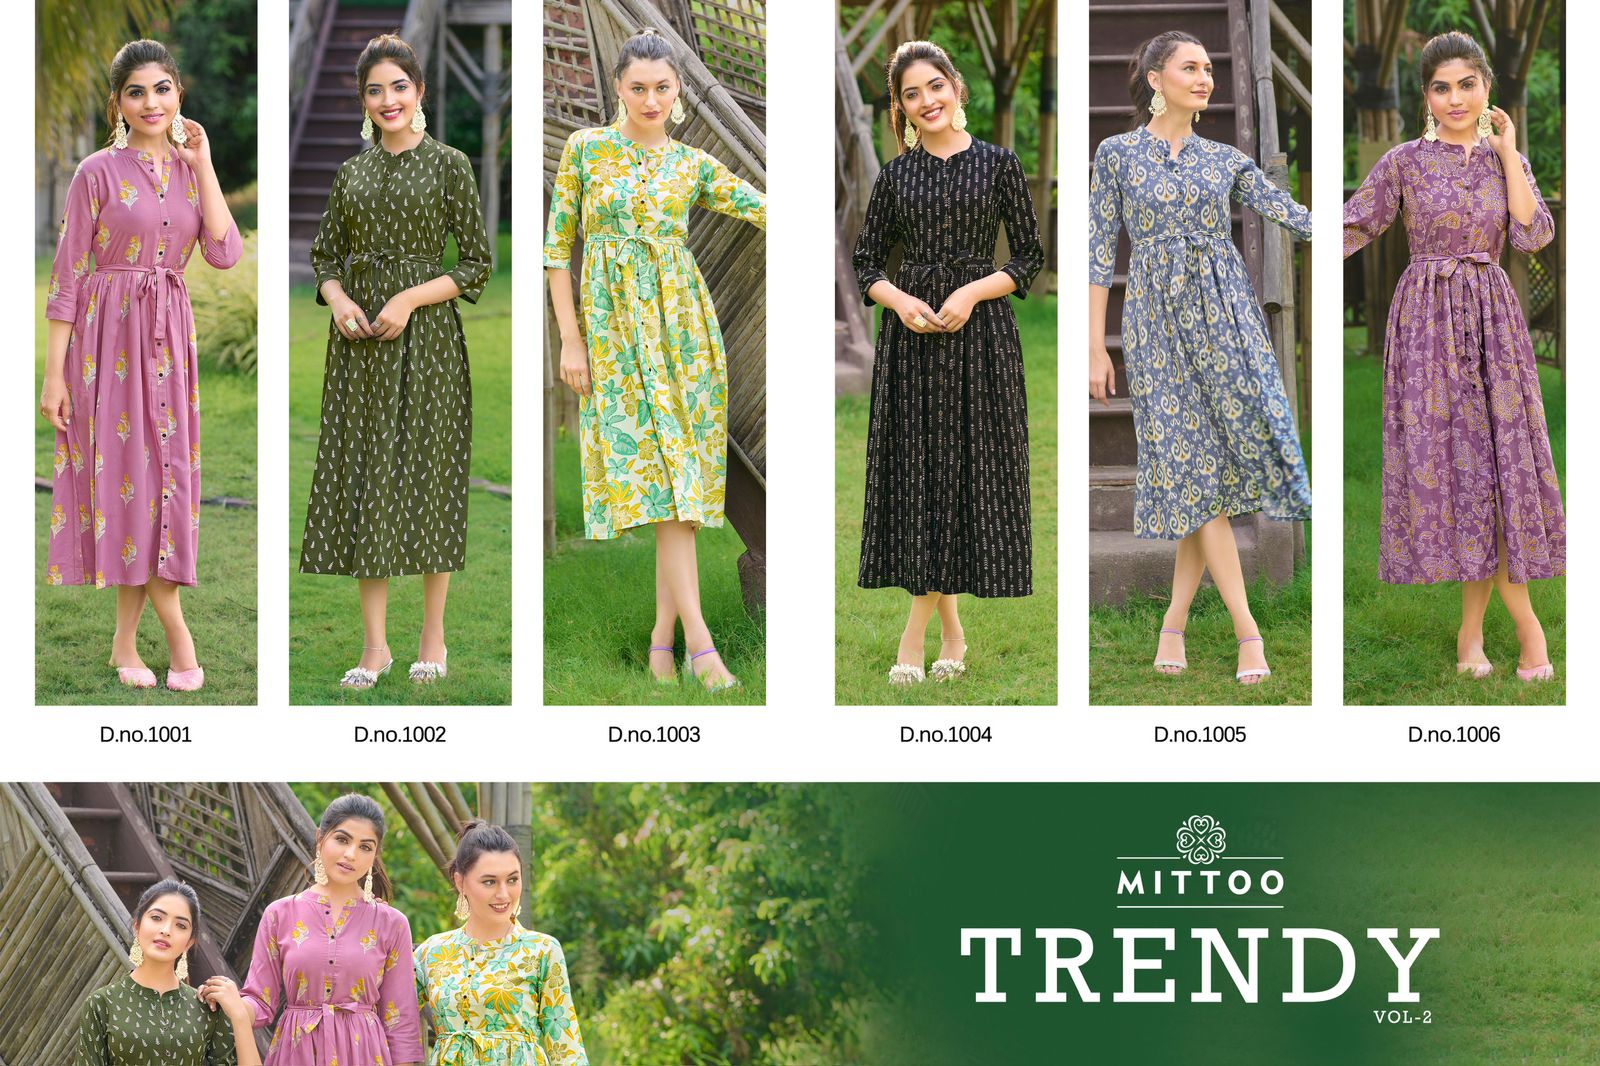 Mitto Trendy Vol 2 collection 3